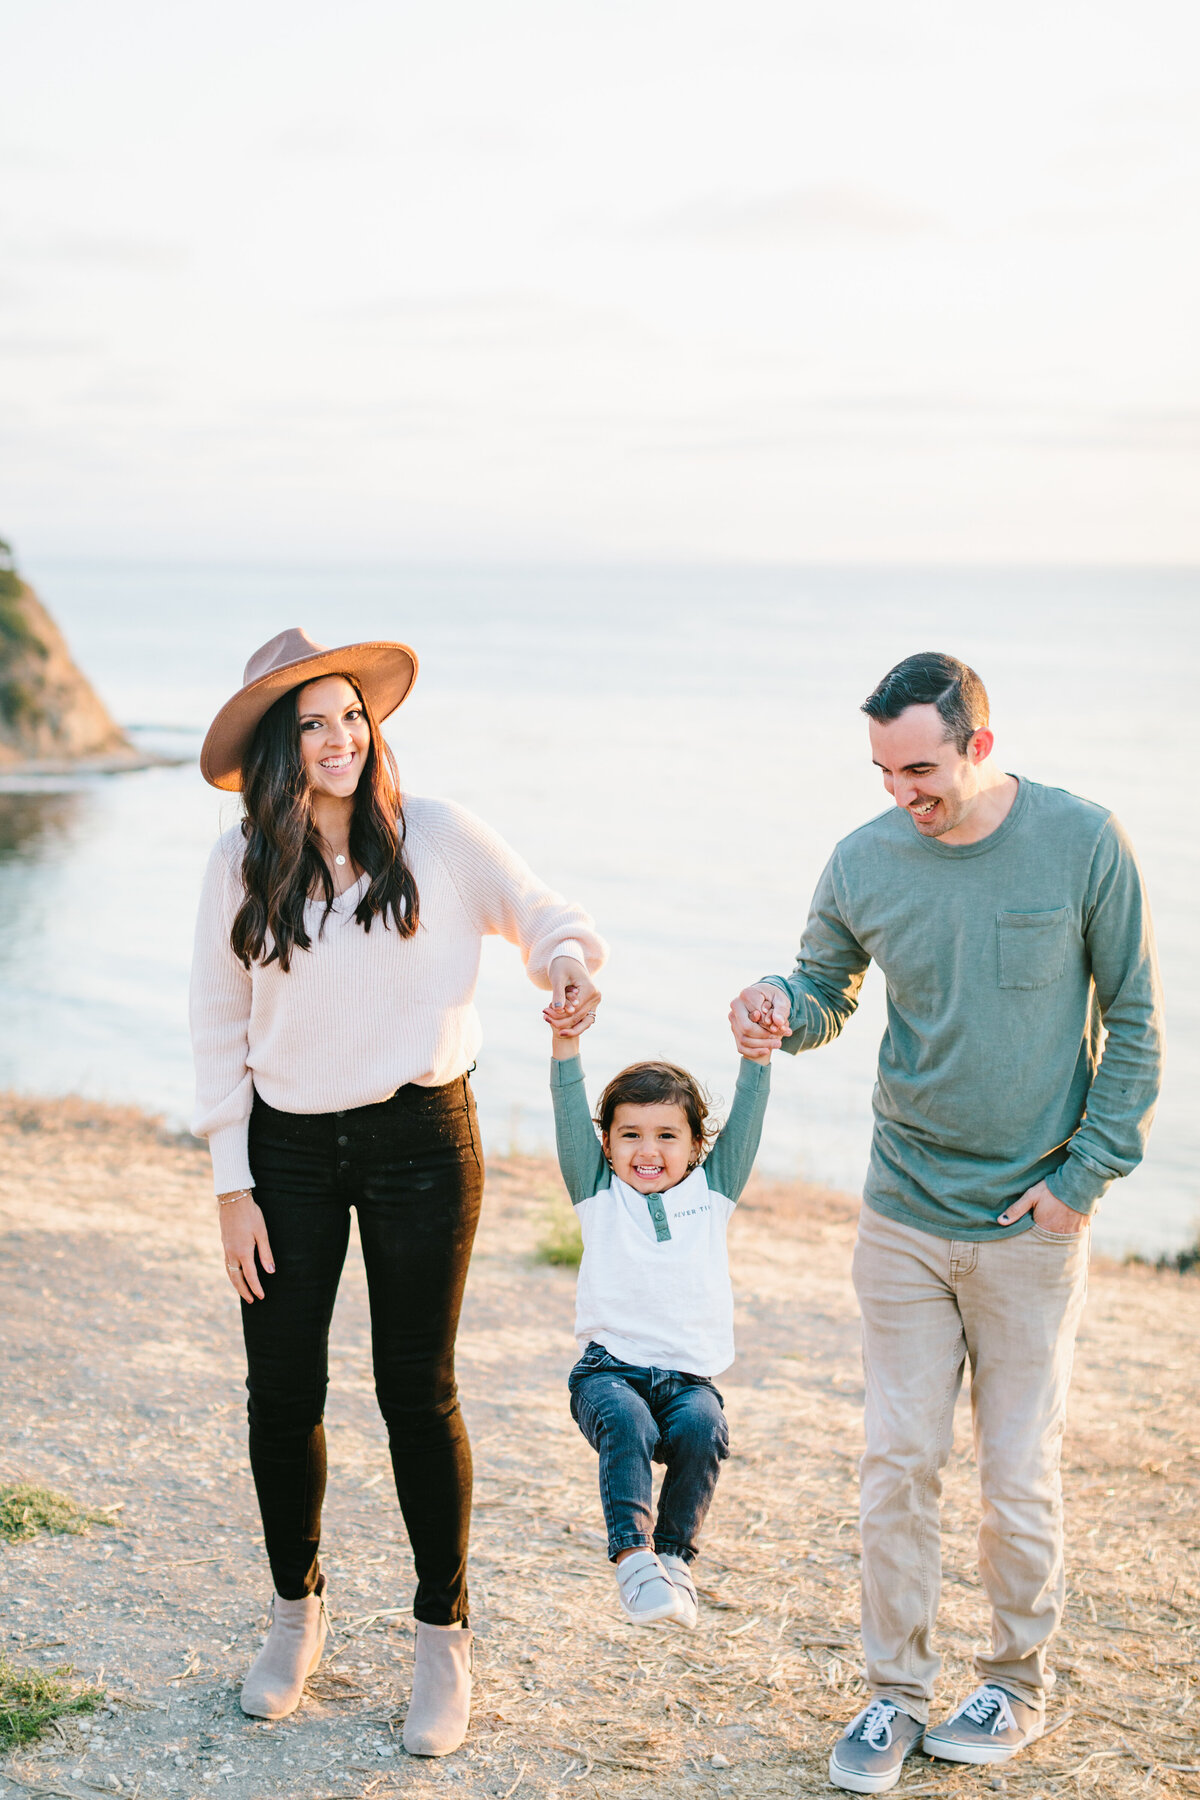 Best California and Texas Family Photographer-Jodee Debes Photography-248